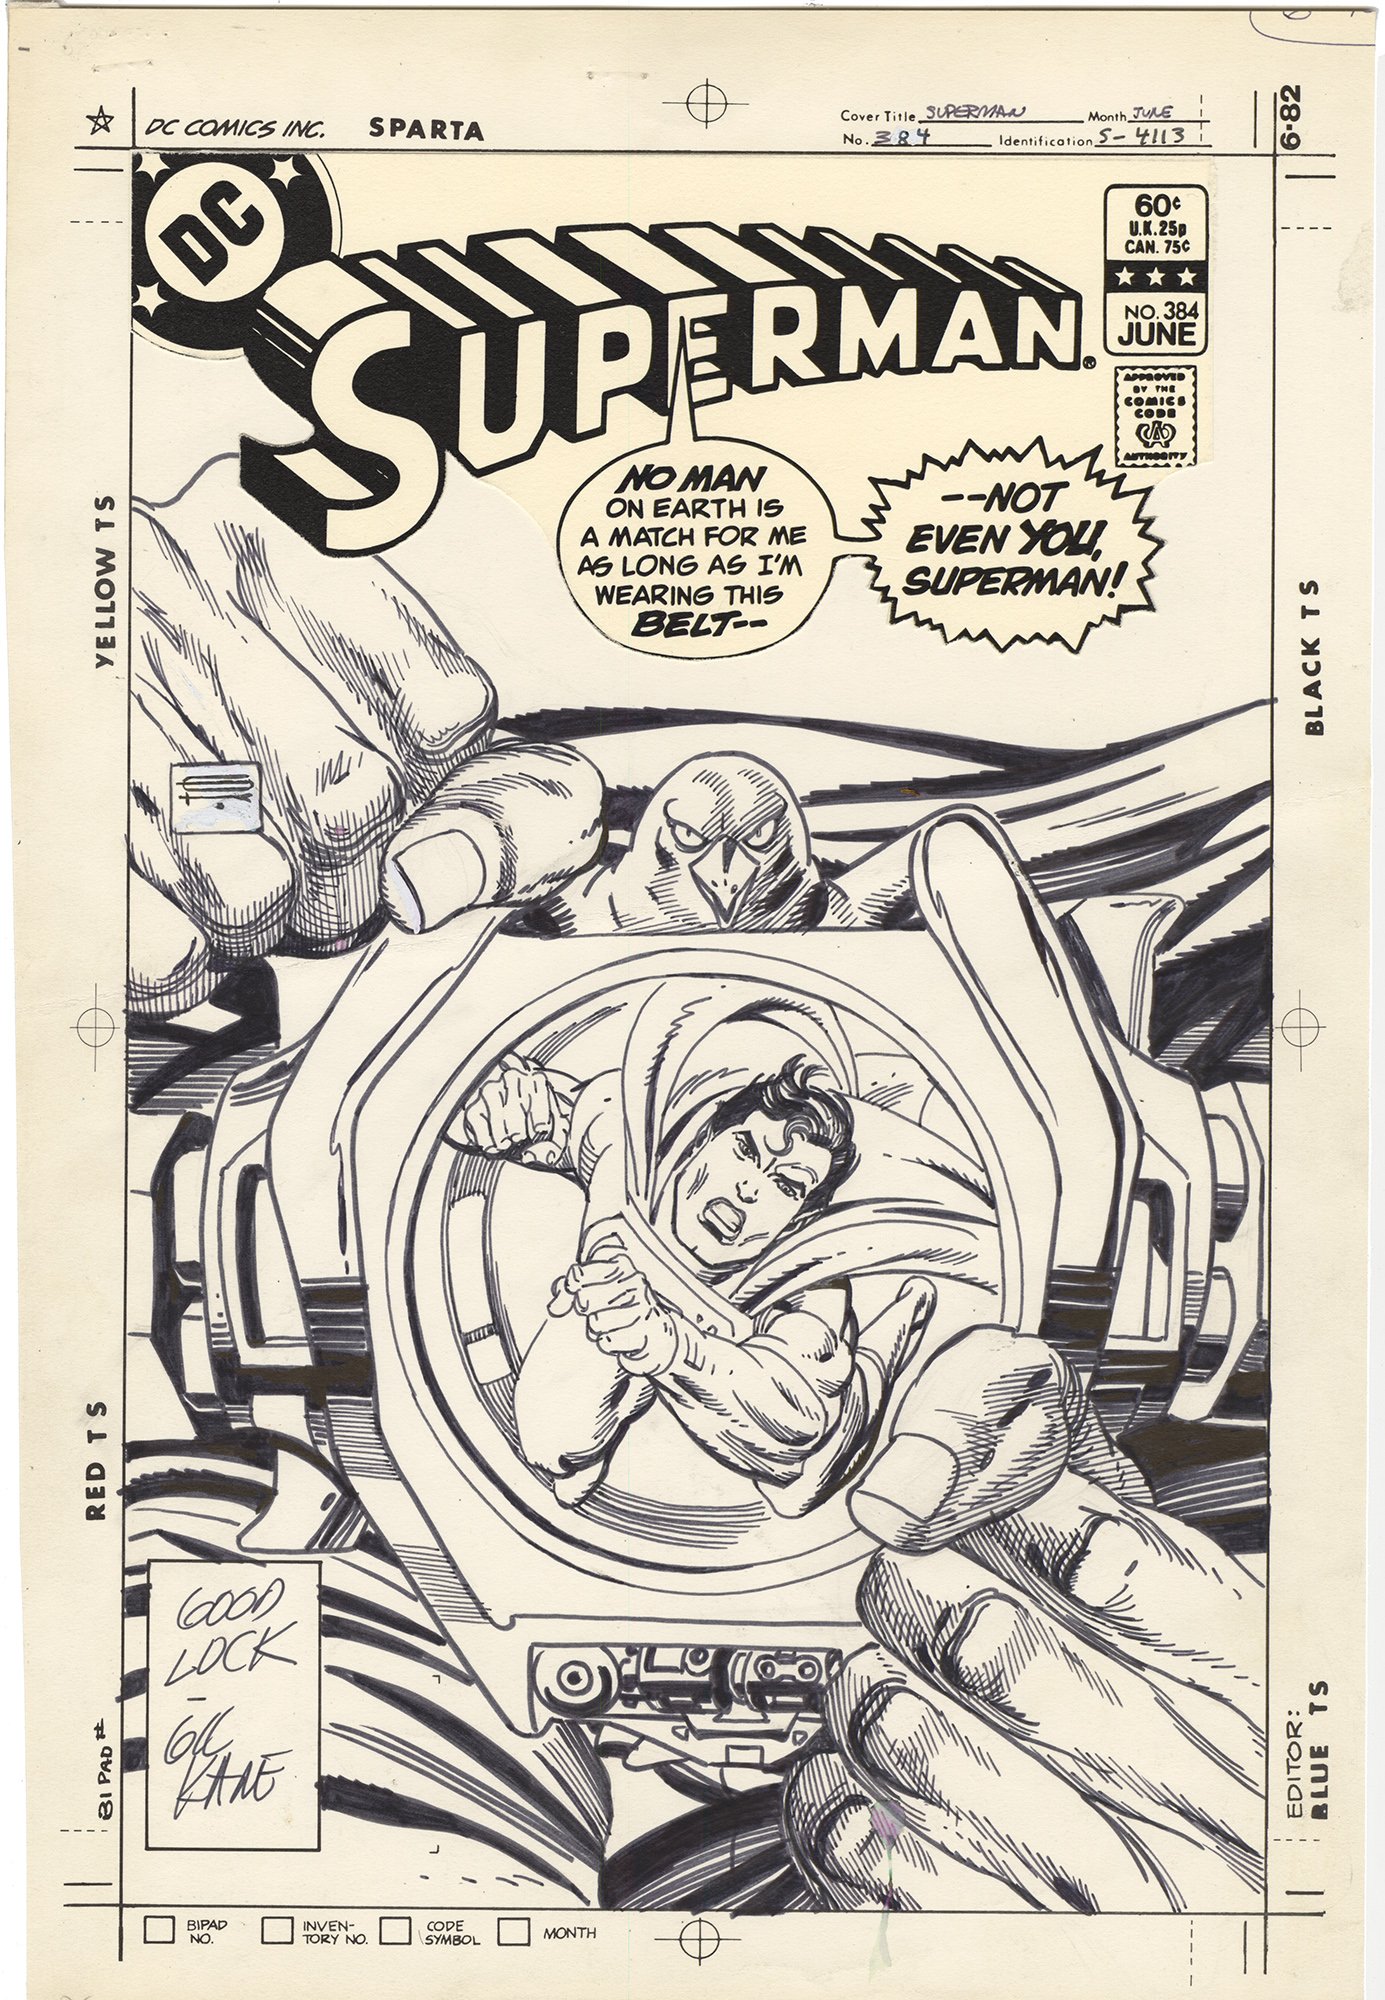 Superman #384 Cover (Signed)